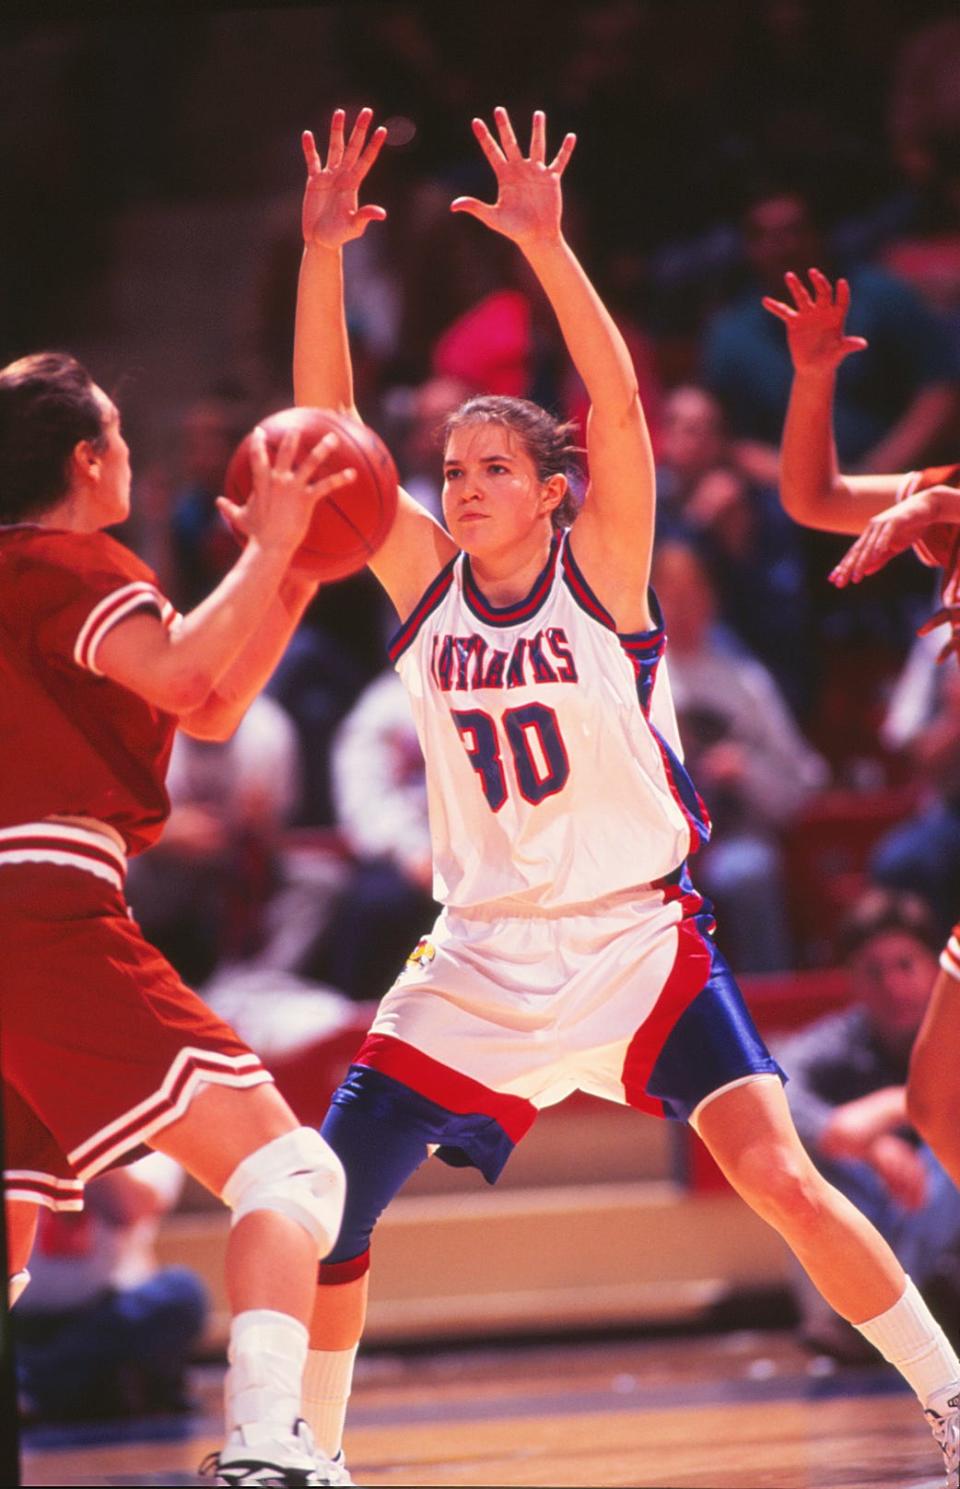 Angie Halbleib's Kansas team was eliminated by Wisconsin in the NCAA Tournament when she was a sophomore, but she led KU to the Sweet 16 one year later.